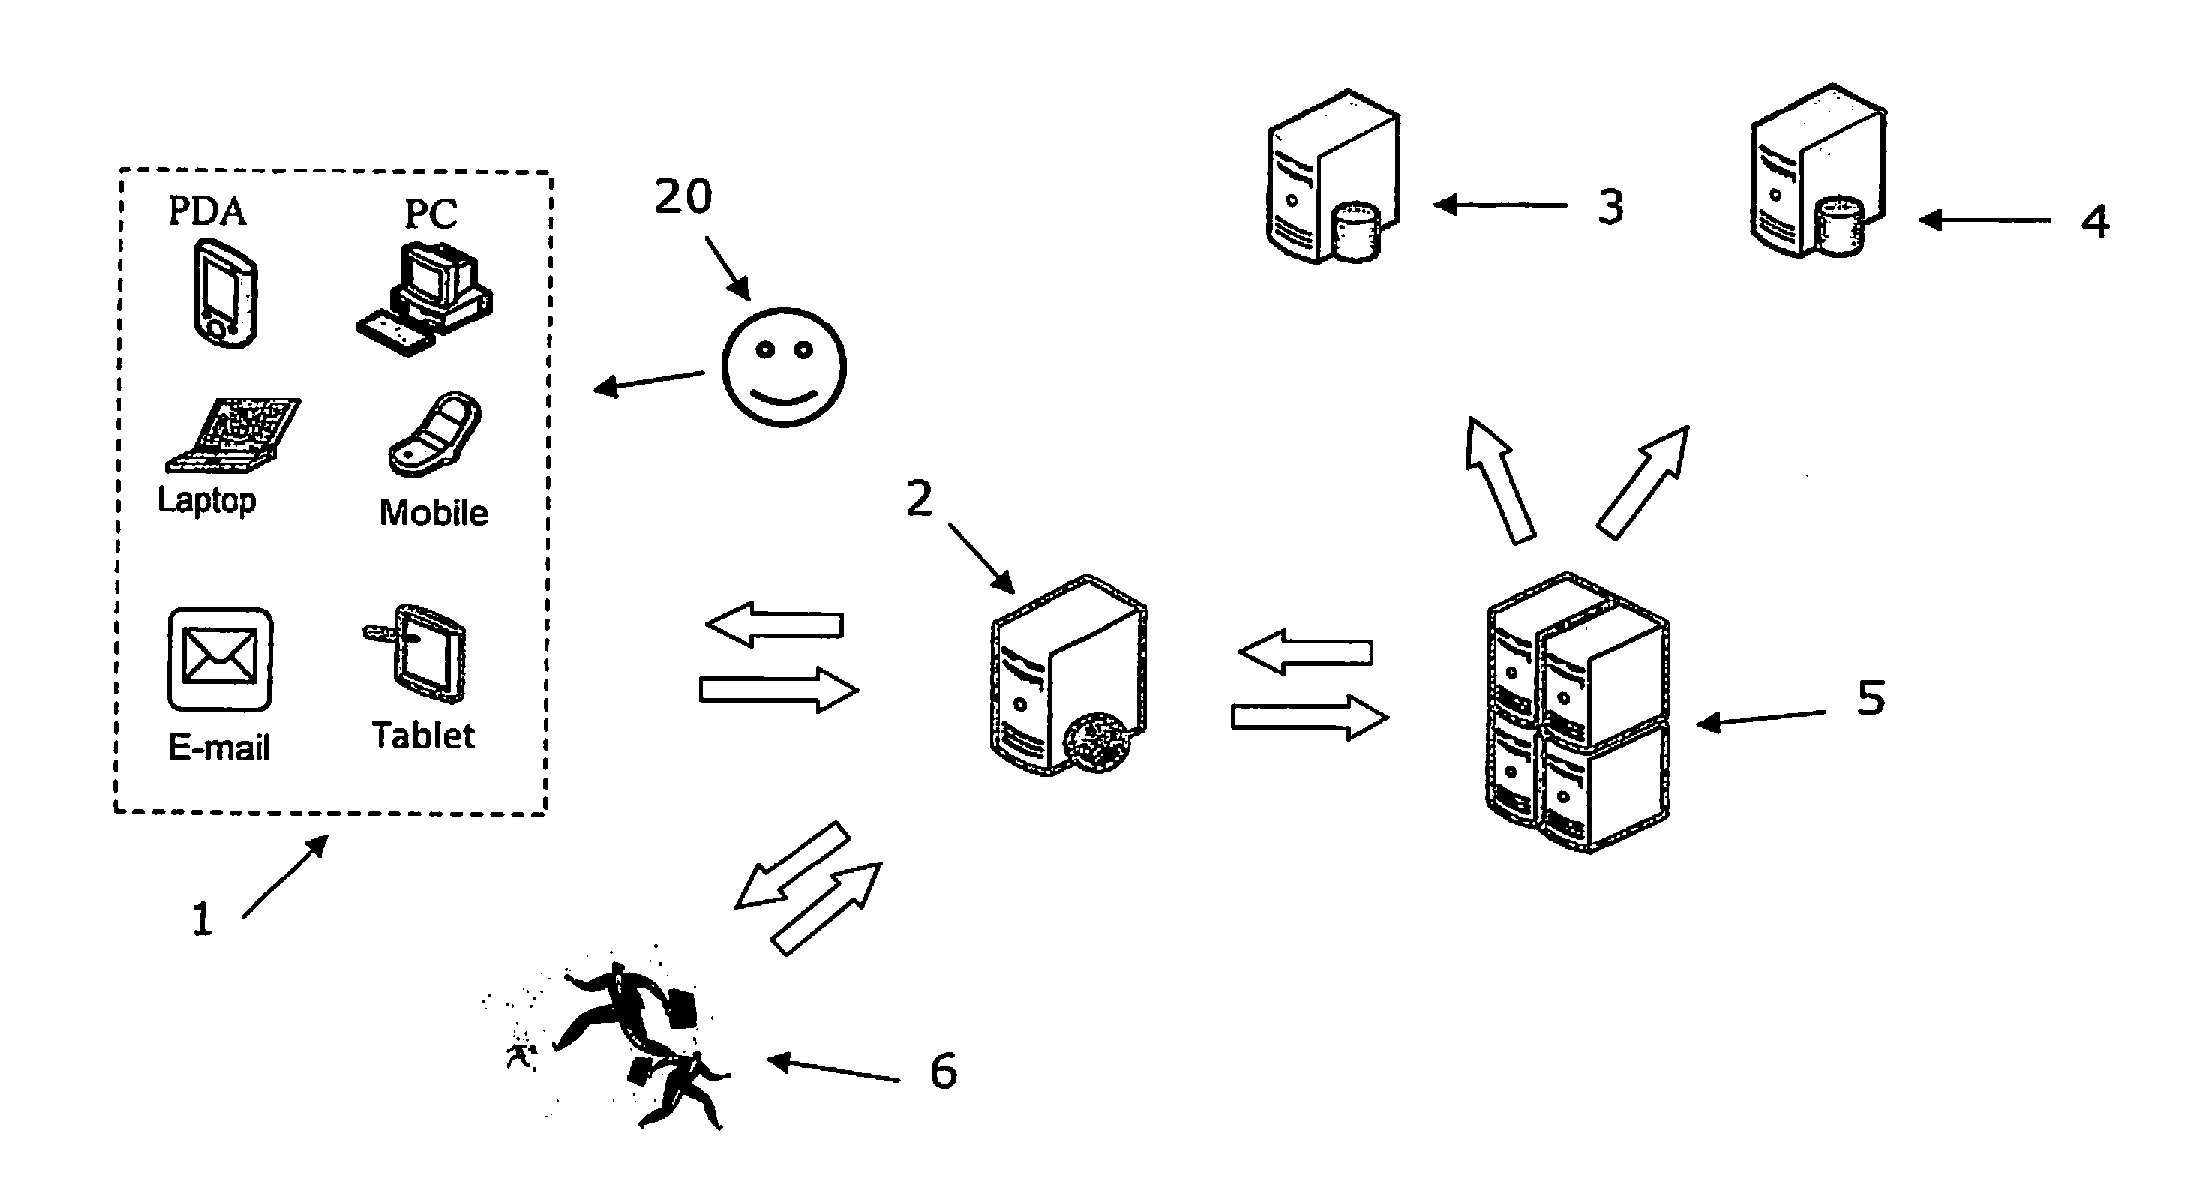 Methods and systems for transportation of objects and people through collaboration networks of people connected via trust relationships